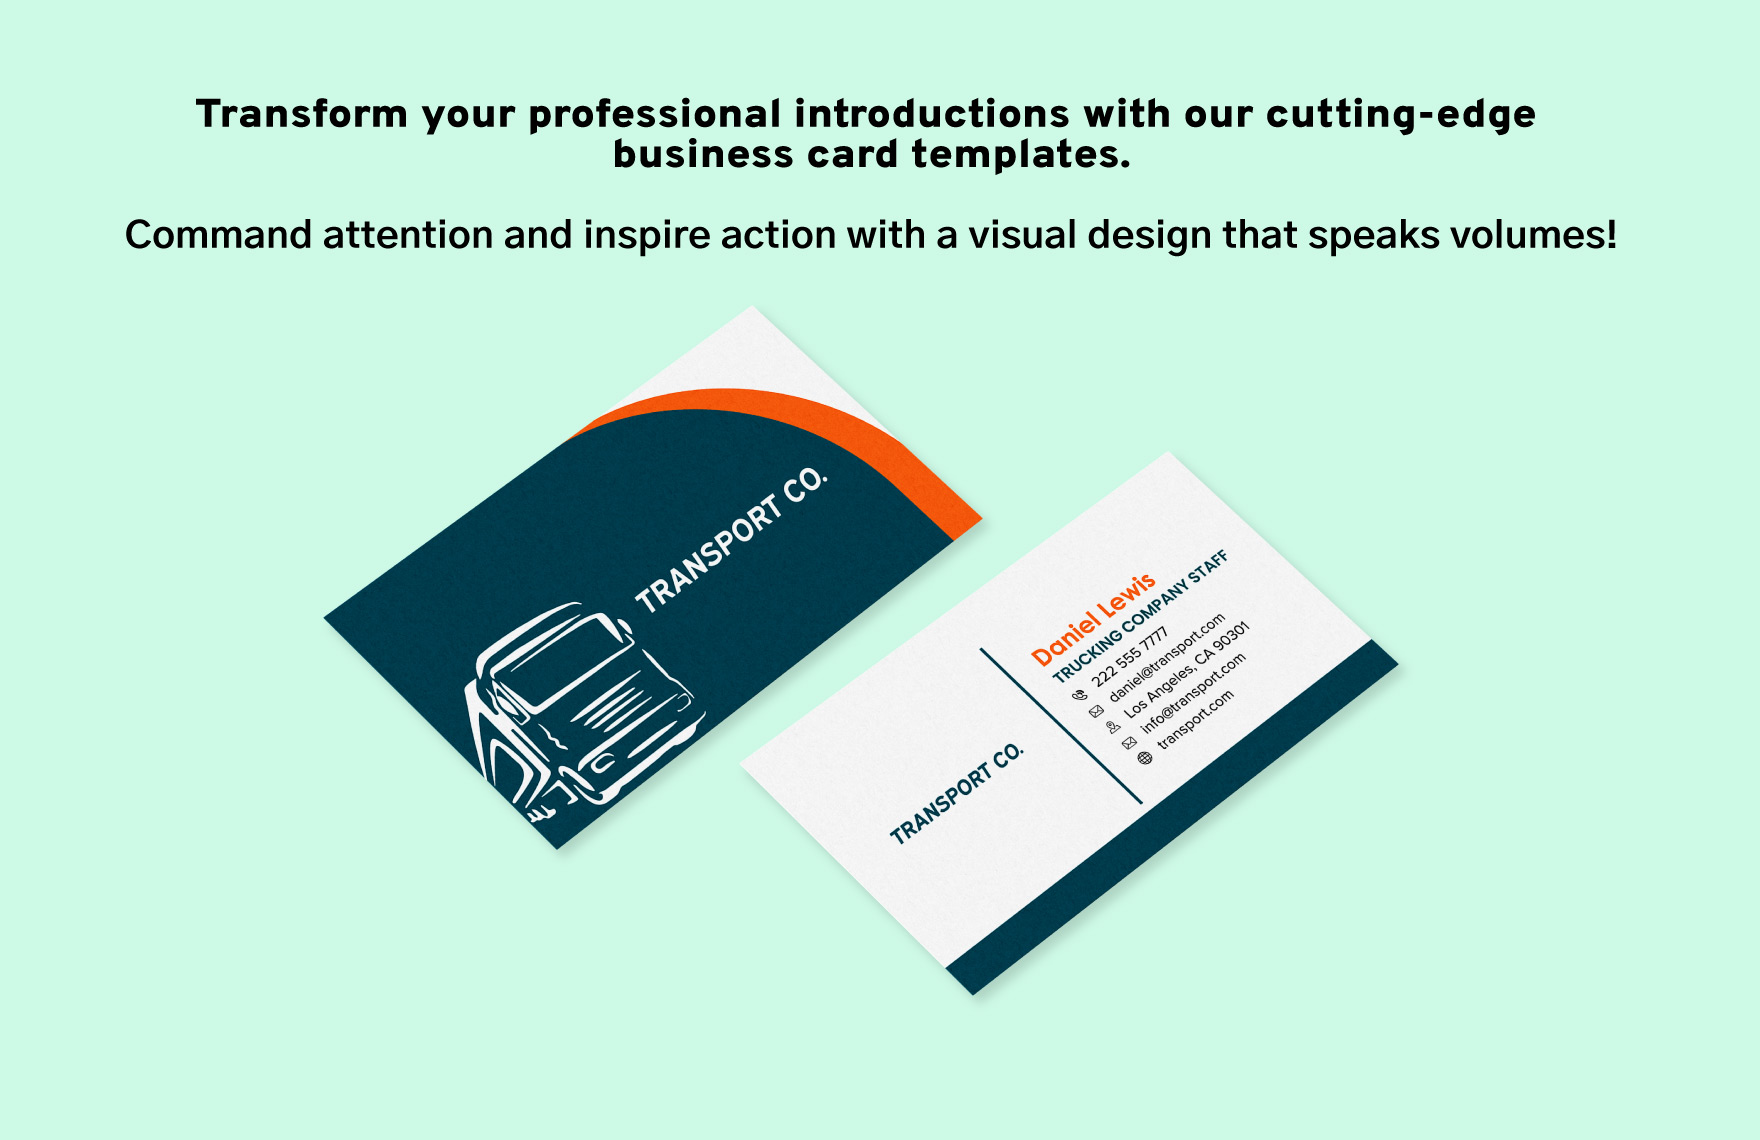 Transport and Logistics Trucking Company Business Card Template